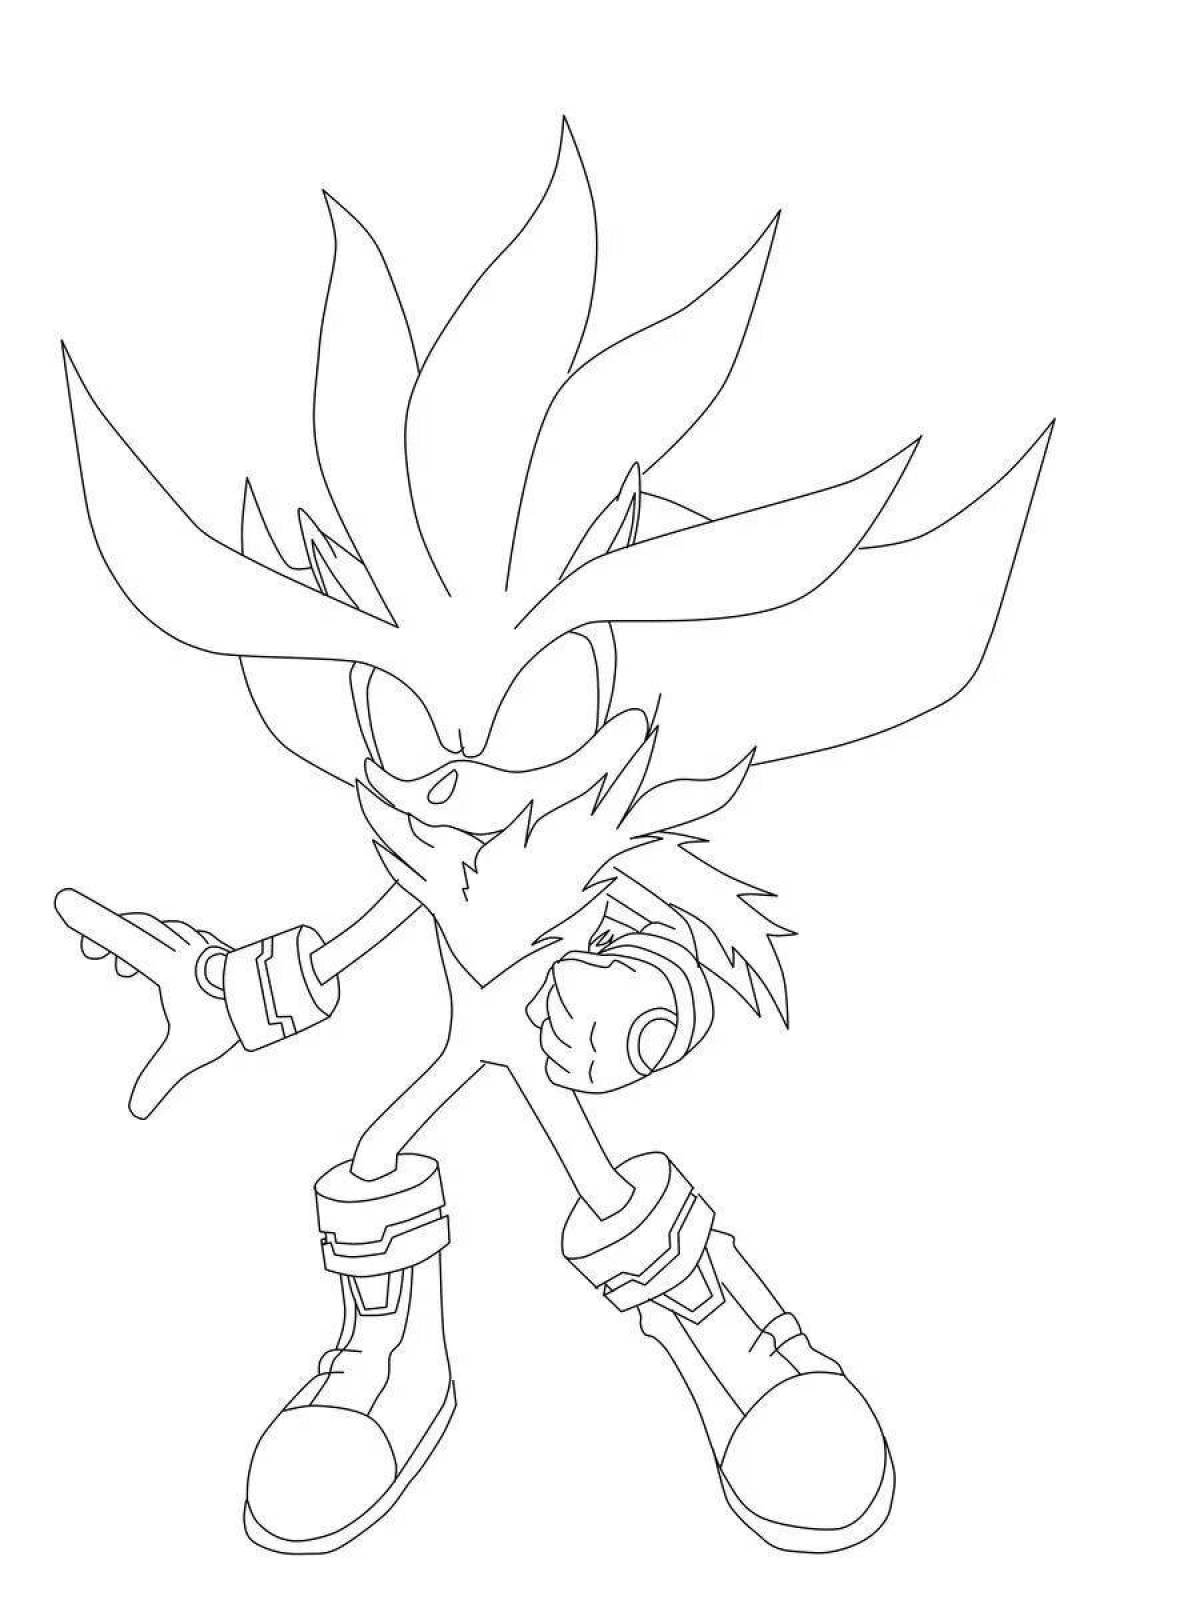 Cute sonic shredder coloring page